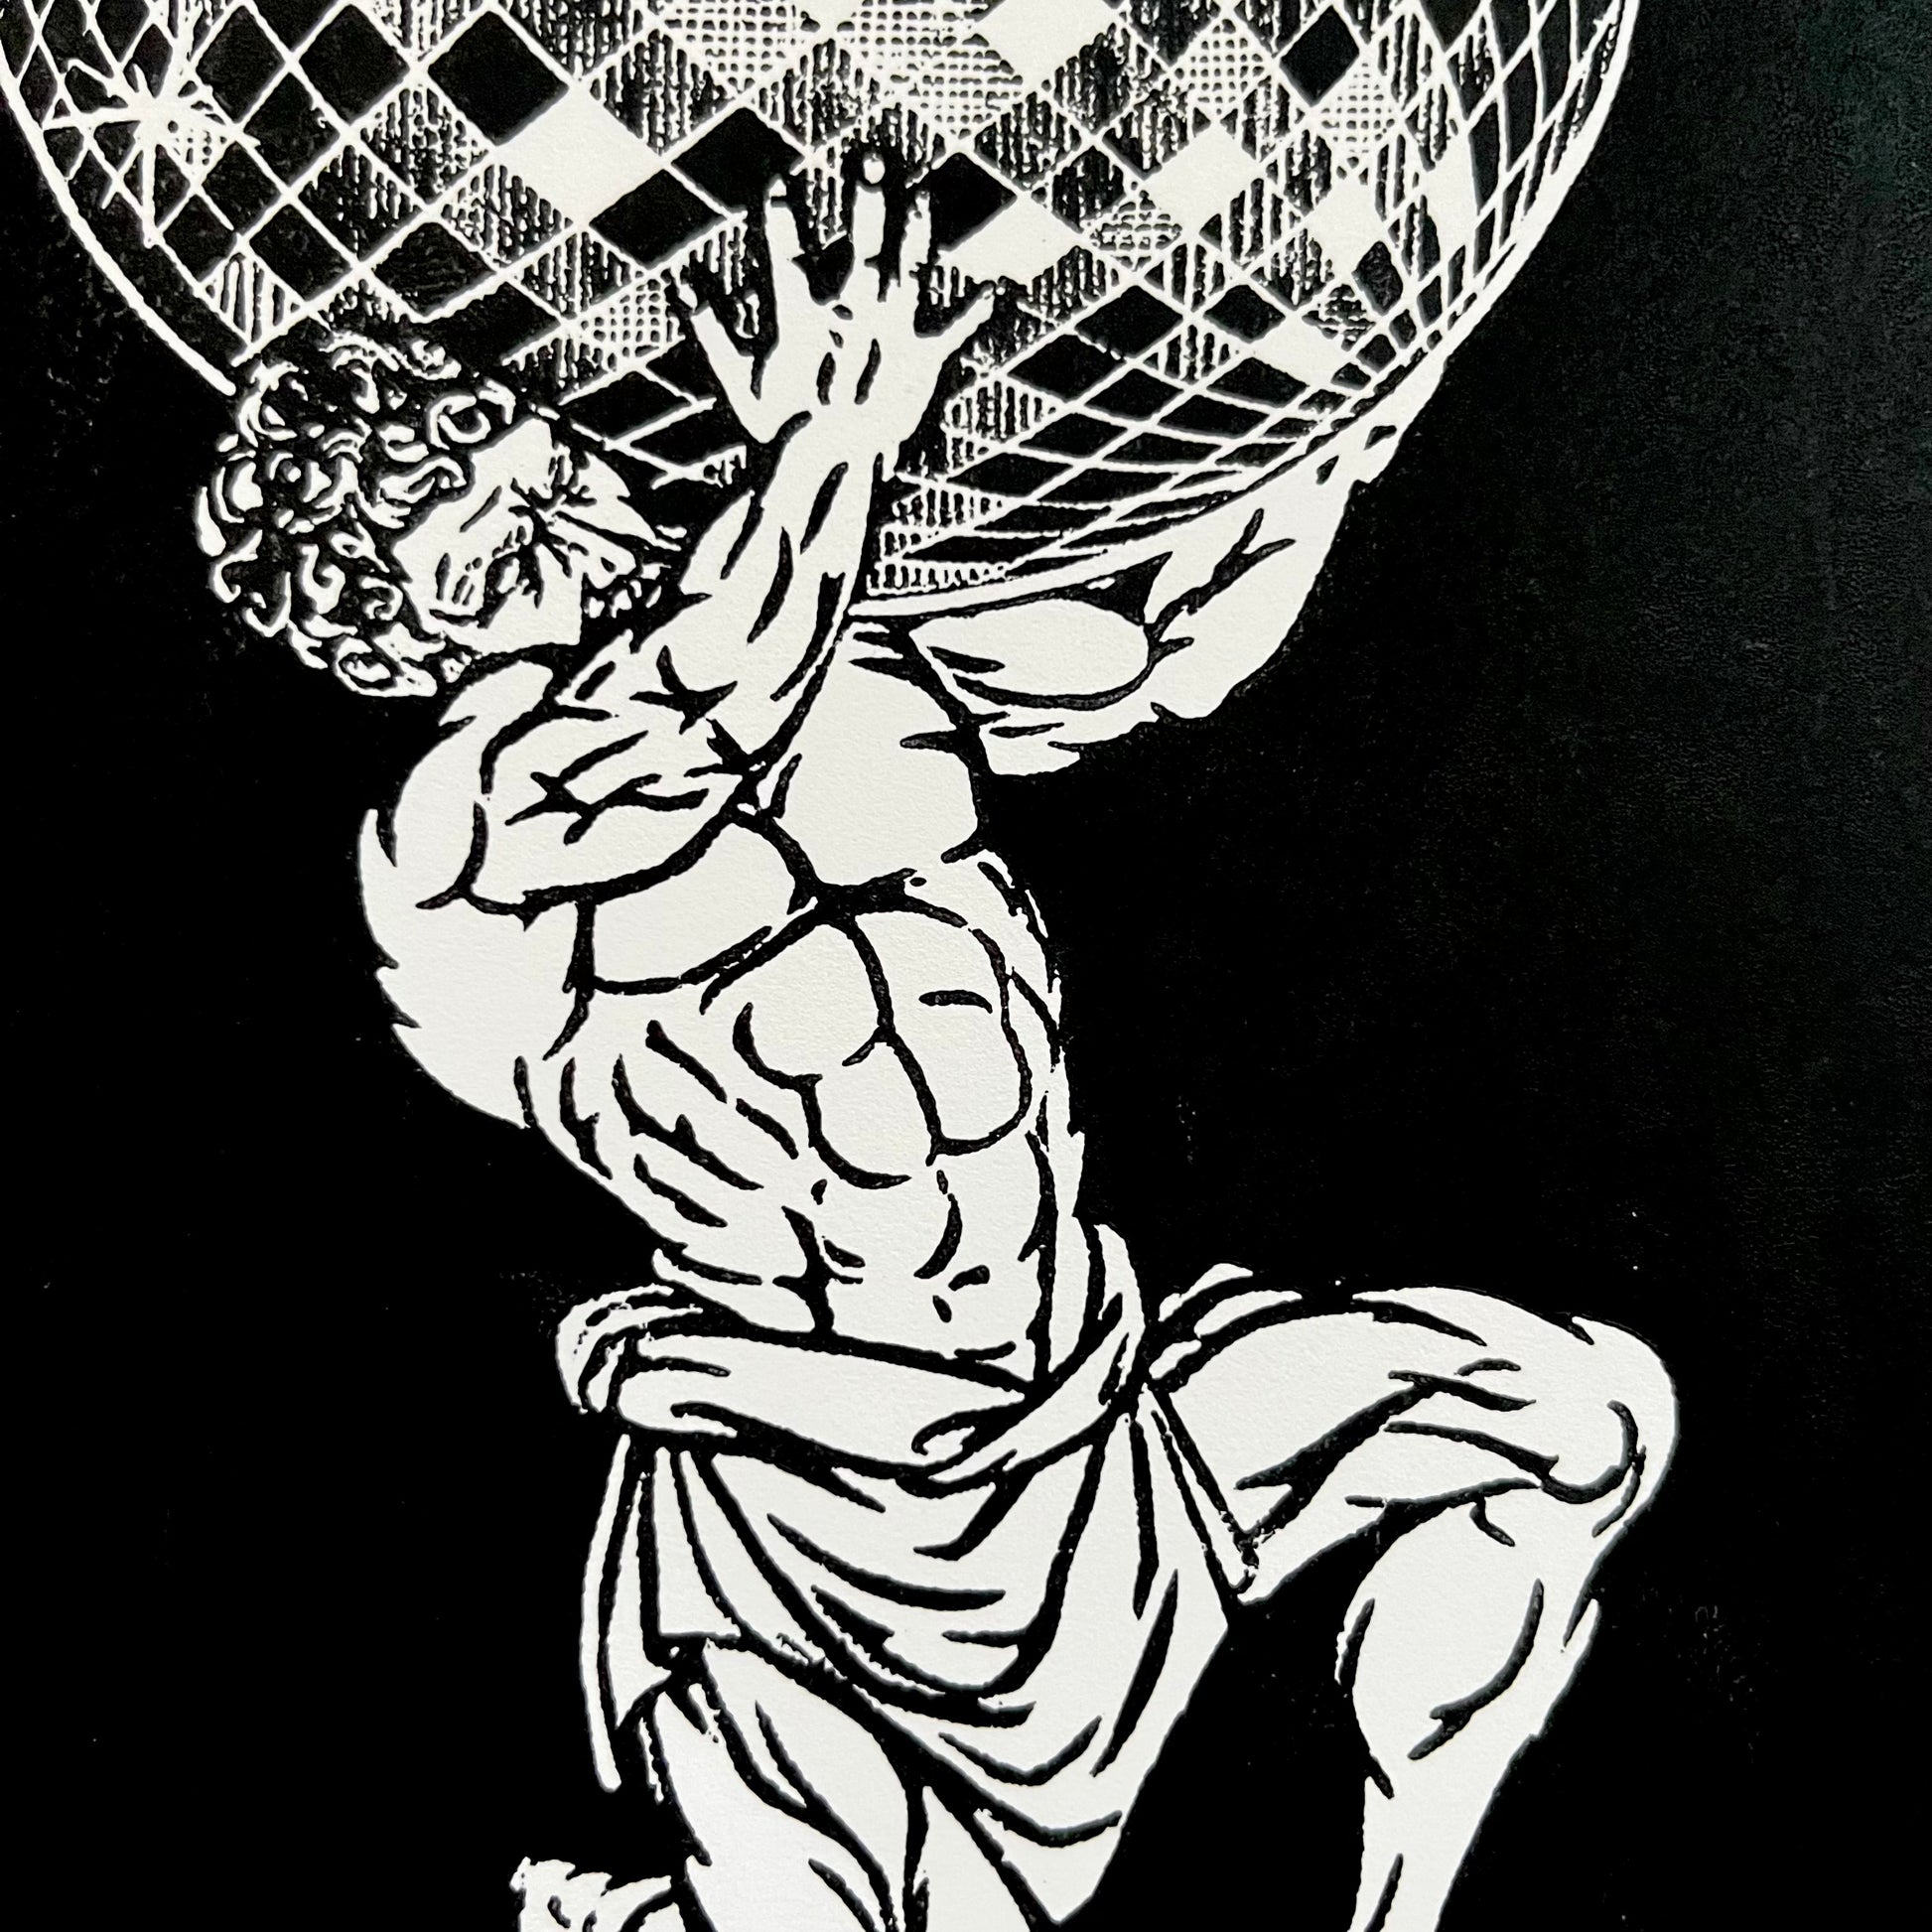 "Atlas at the Disco” LINOCUT PRINT | Limited Edition Queero Gear